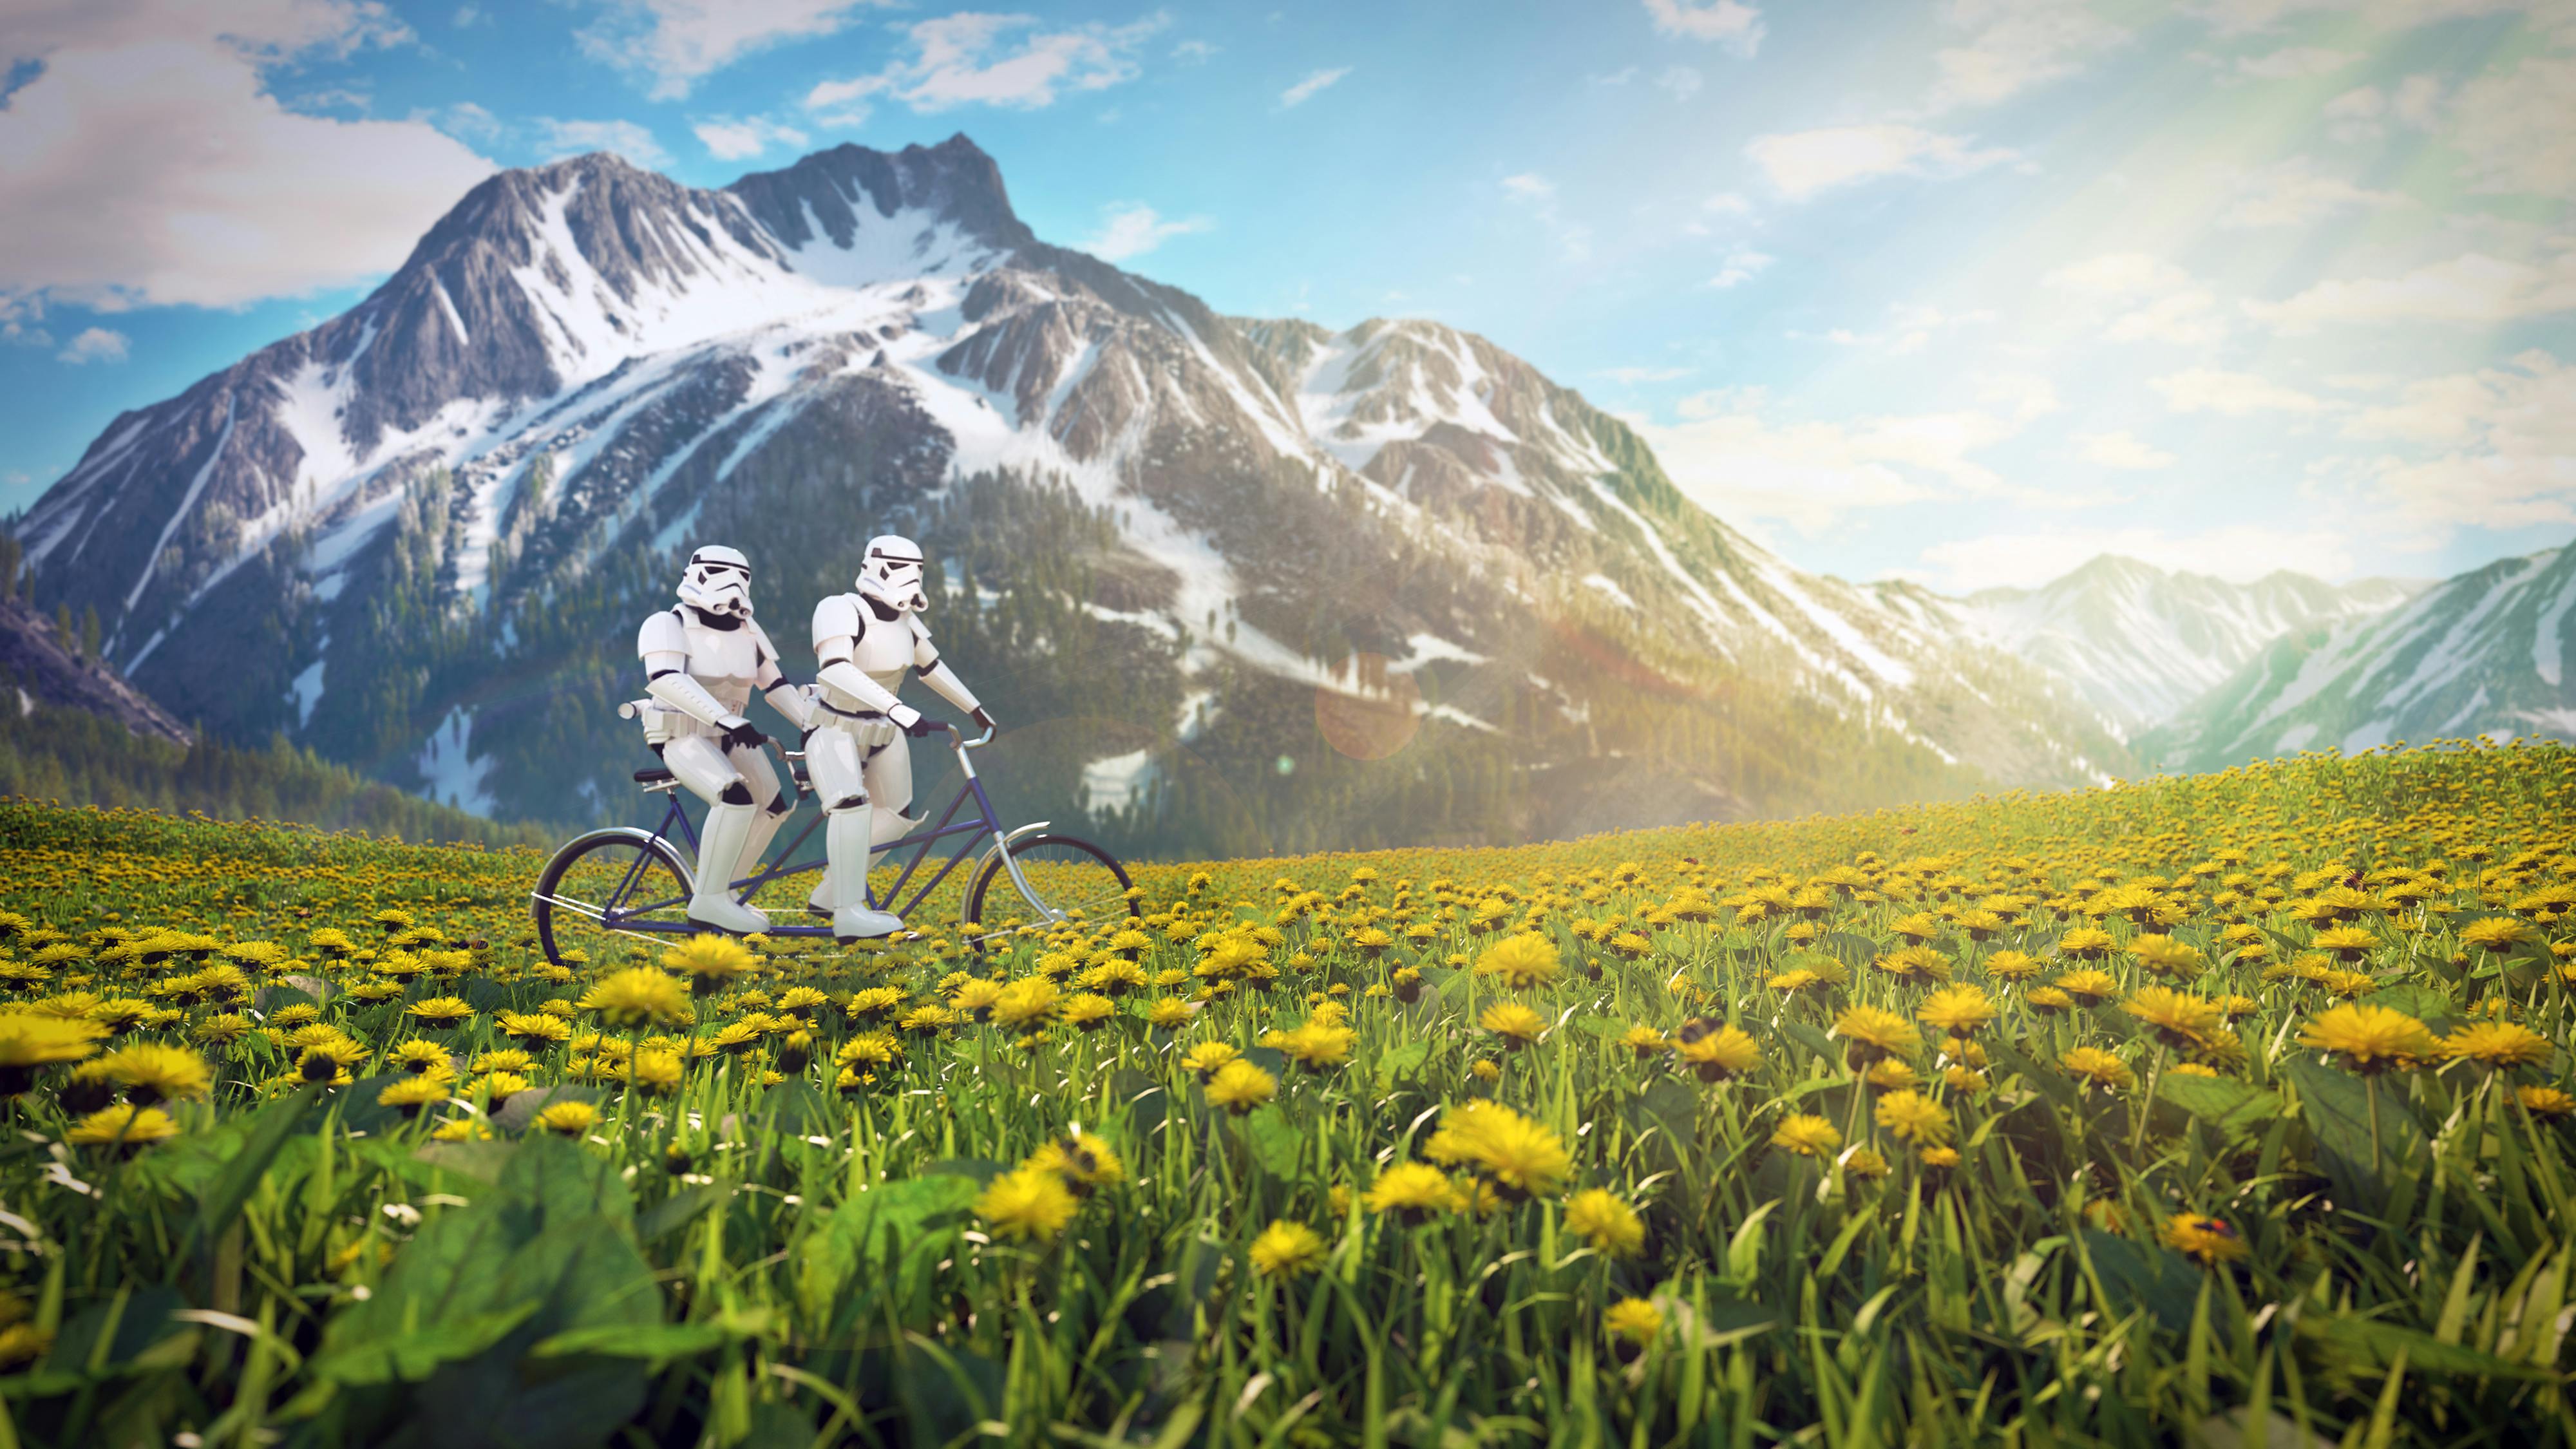 Storm Troopers looking to invest in real estate for their dream home